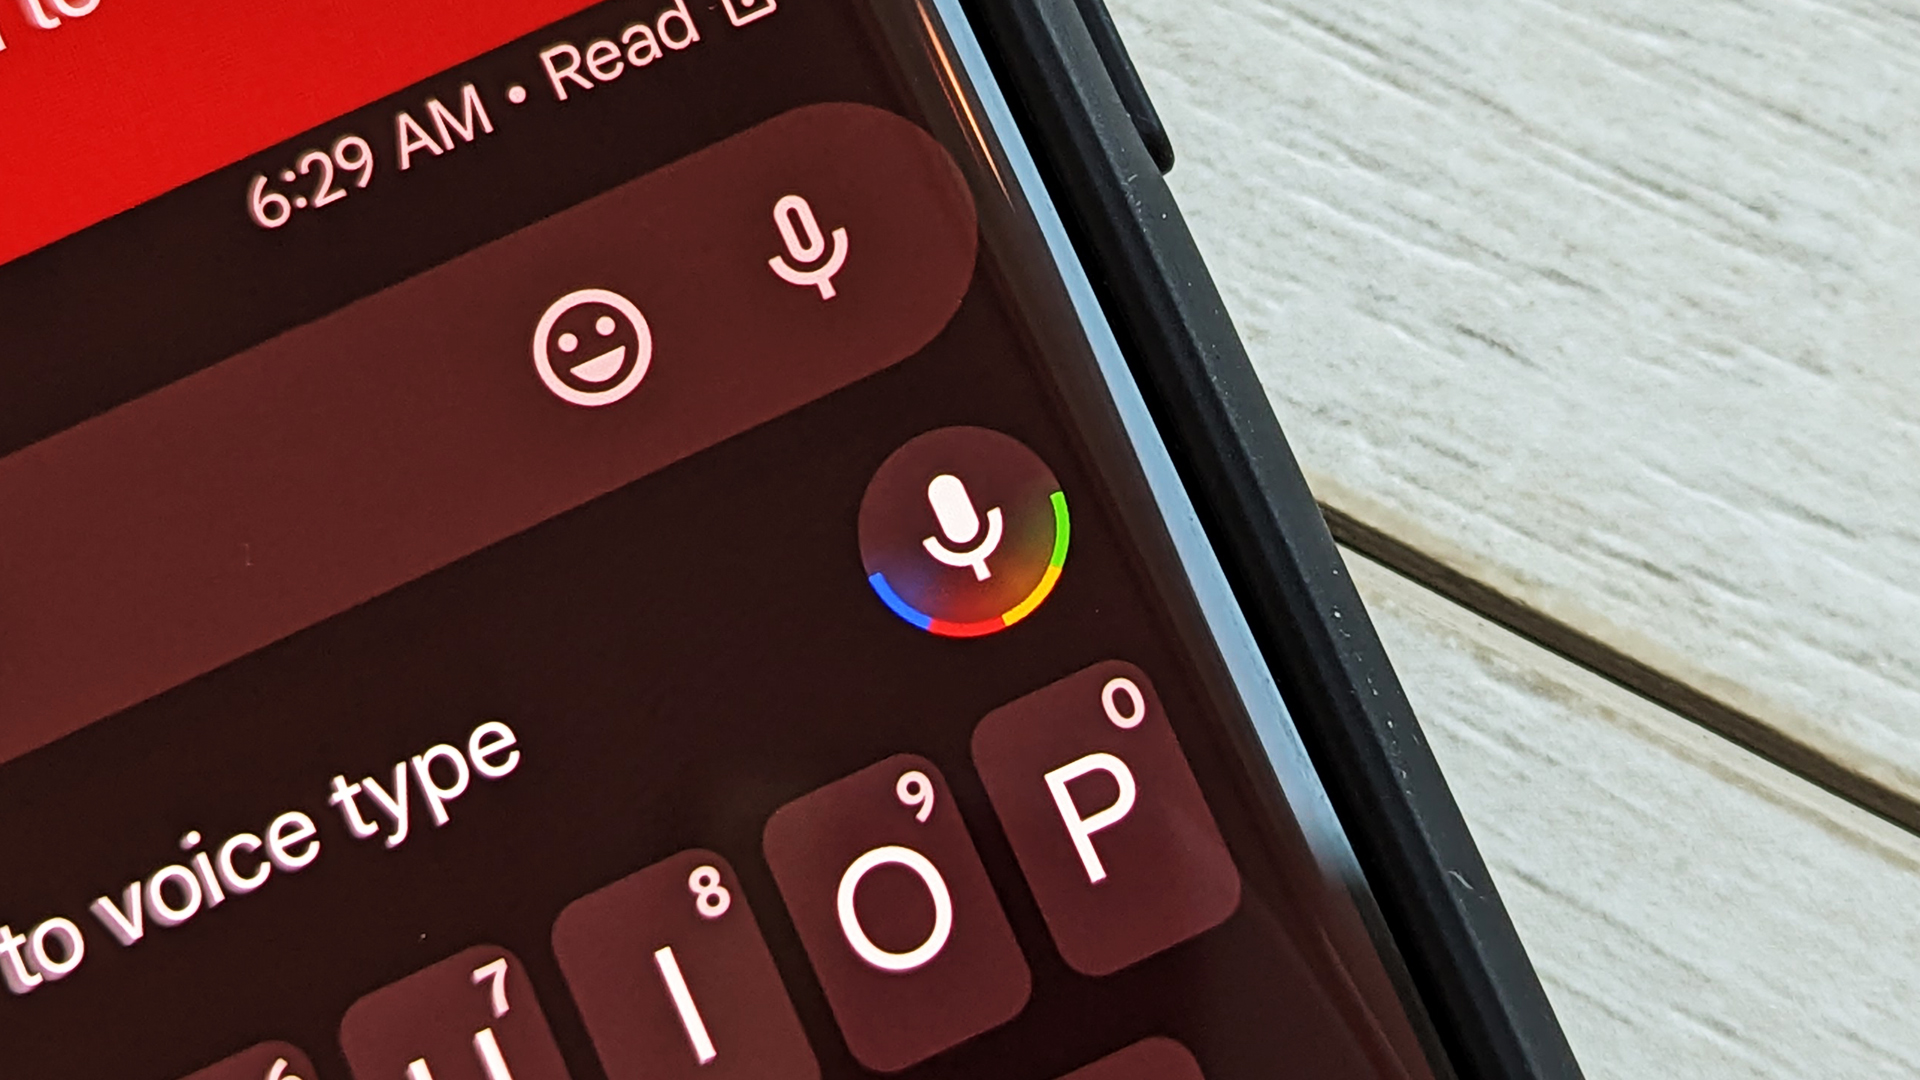 Voice typing on the device by the Google Assistant